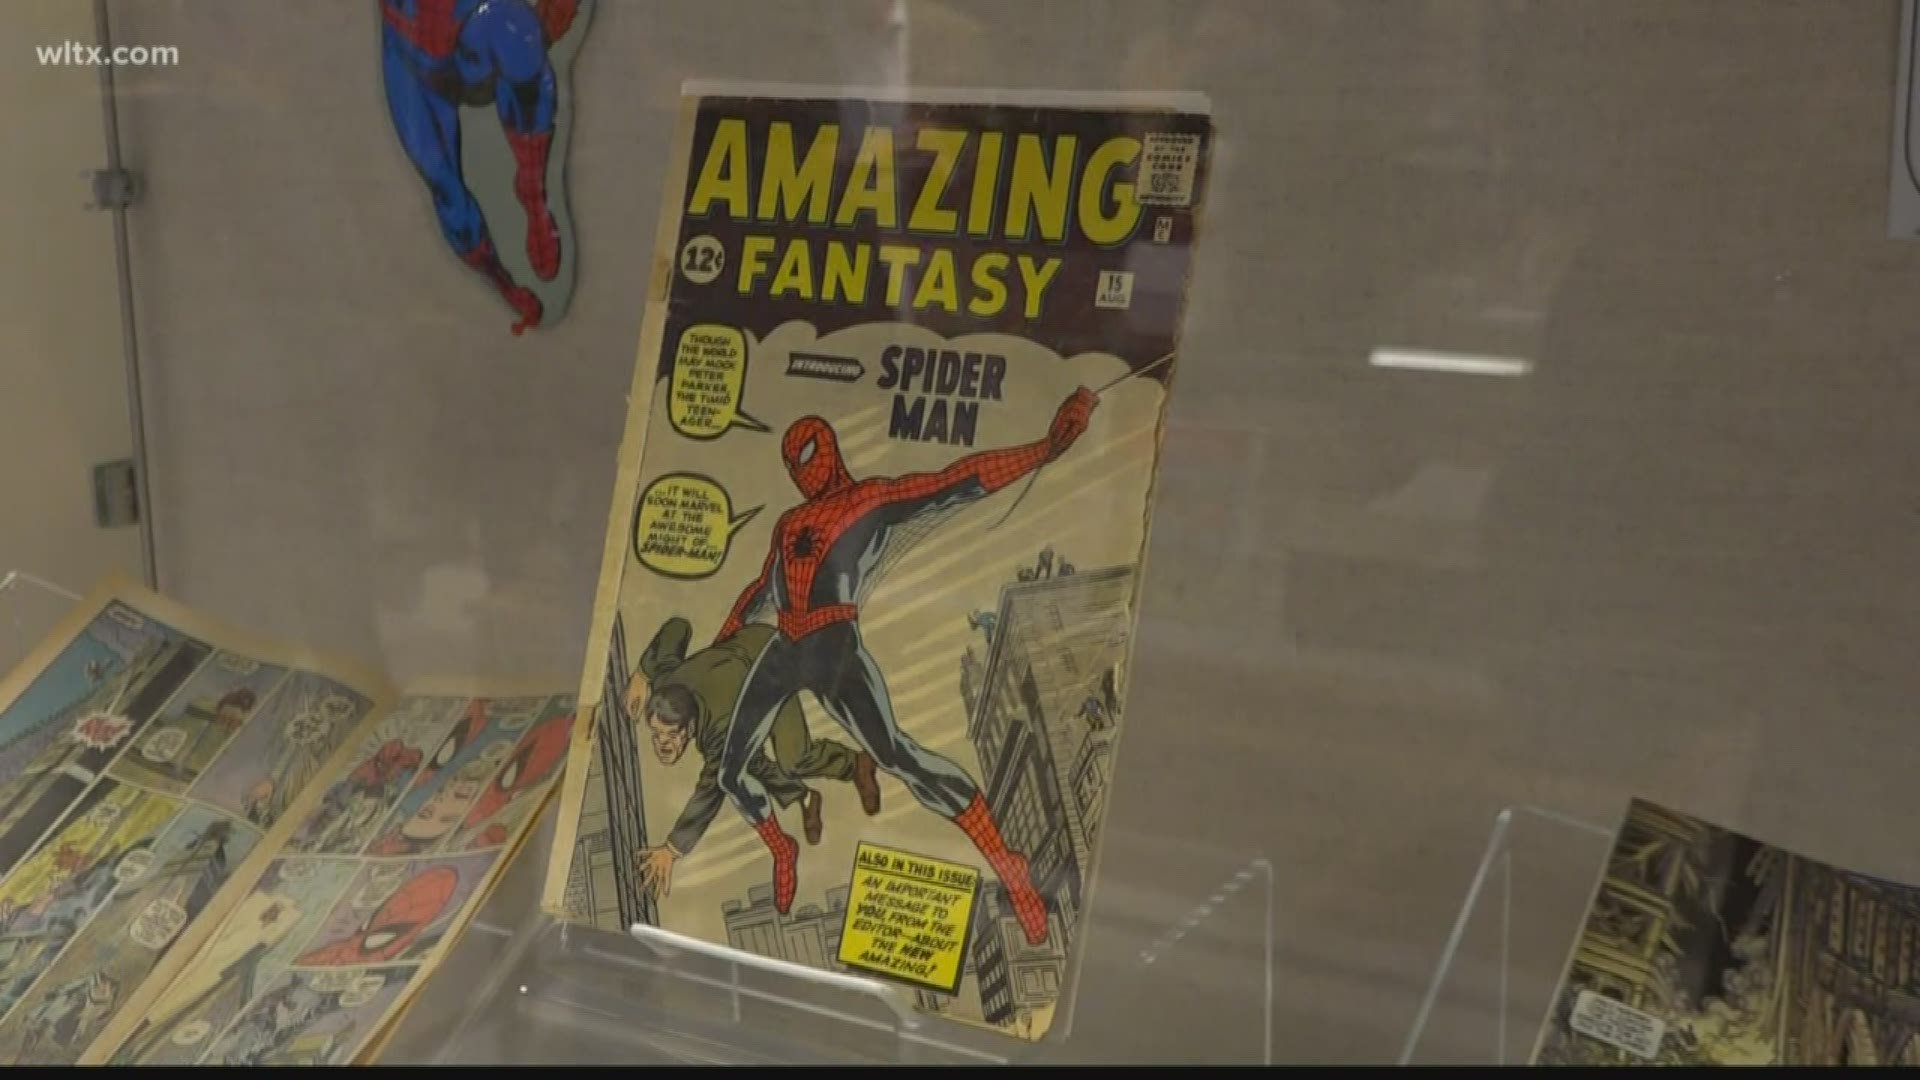 Comic book legends Roy and Dann Thomas were at USC to celebrate its four color fantasies exhibit.